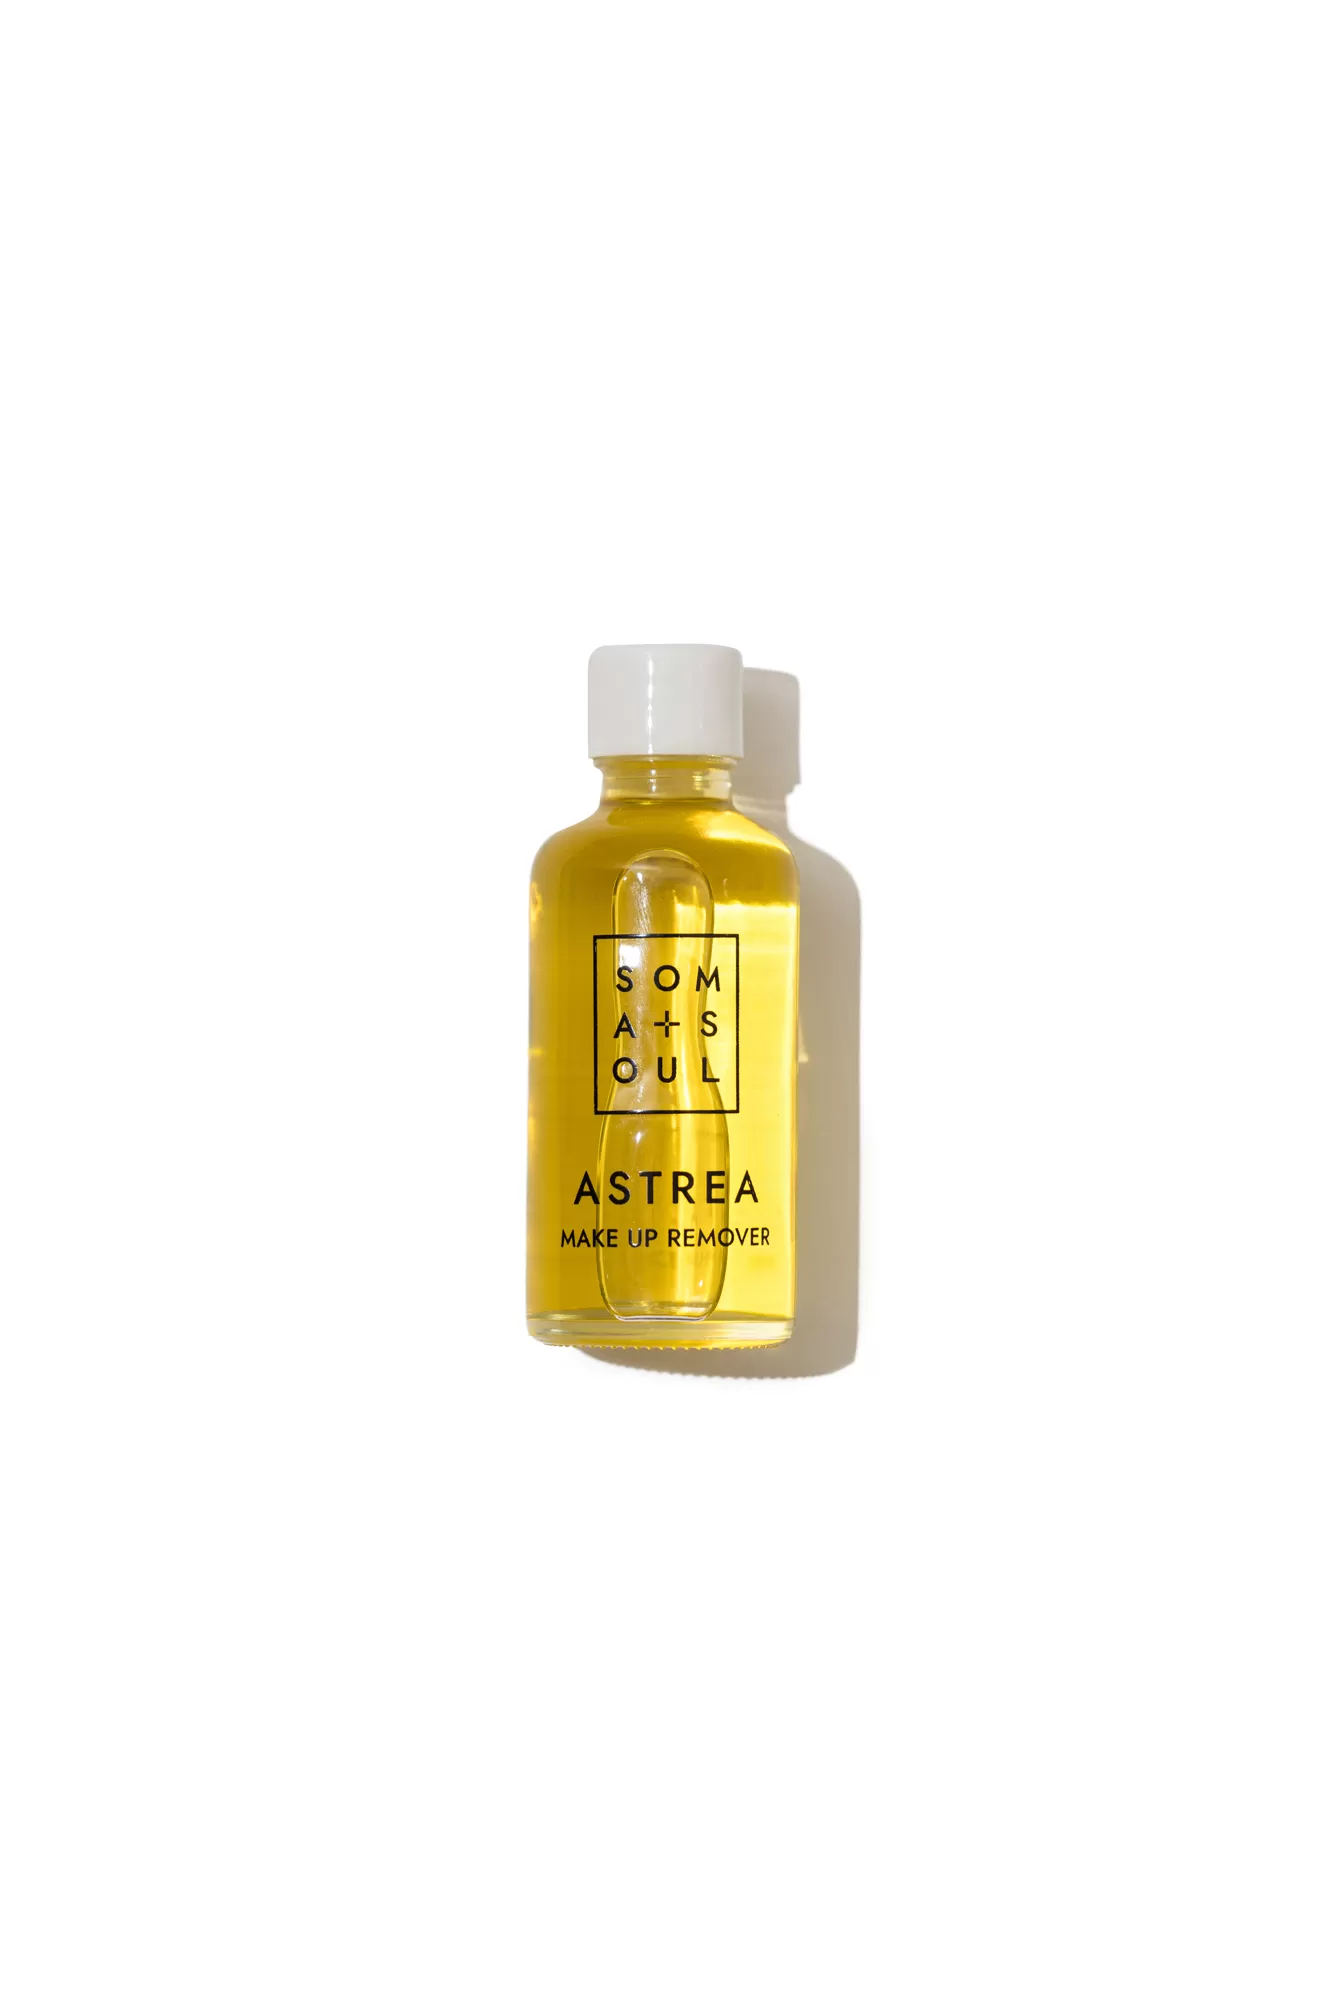 ASTREA make up remover packaging